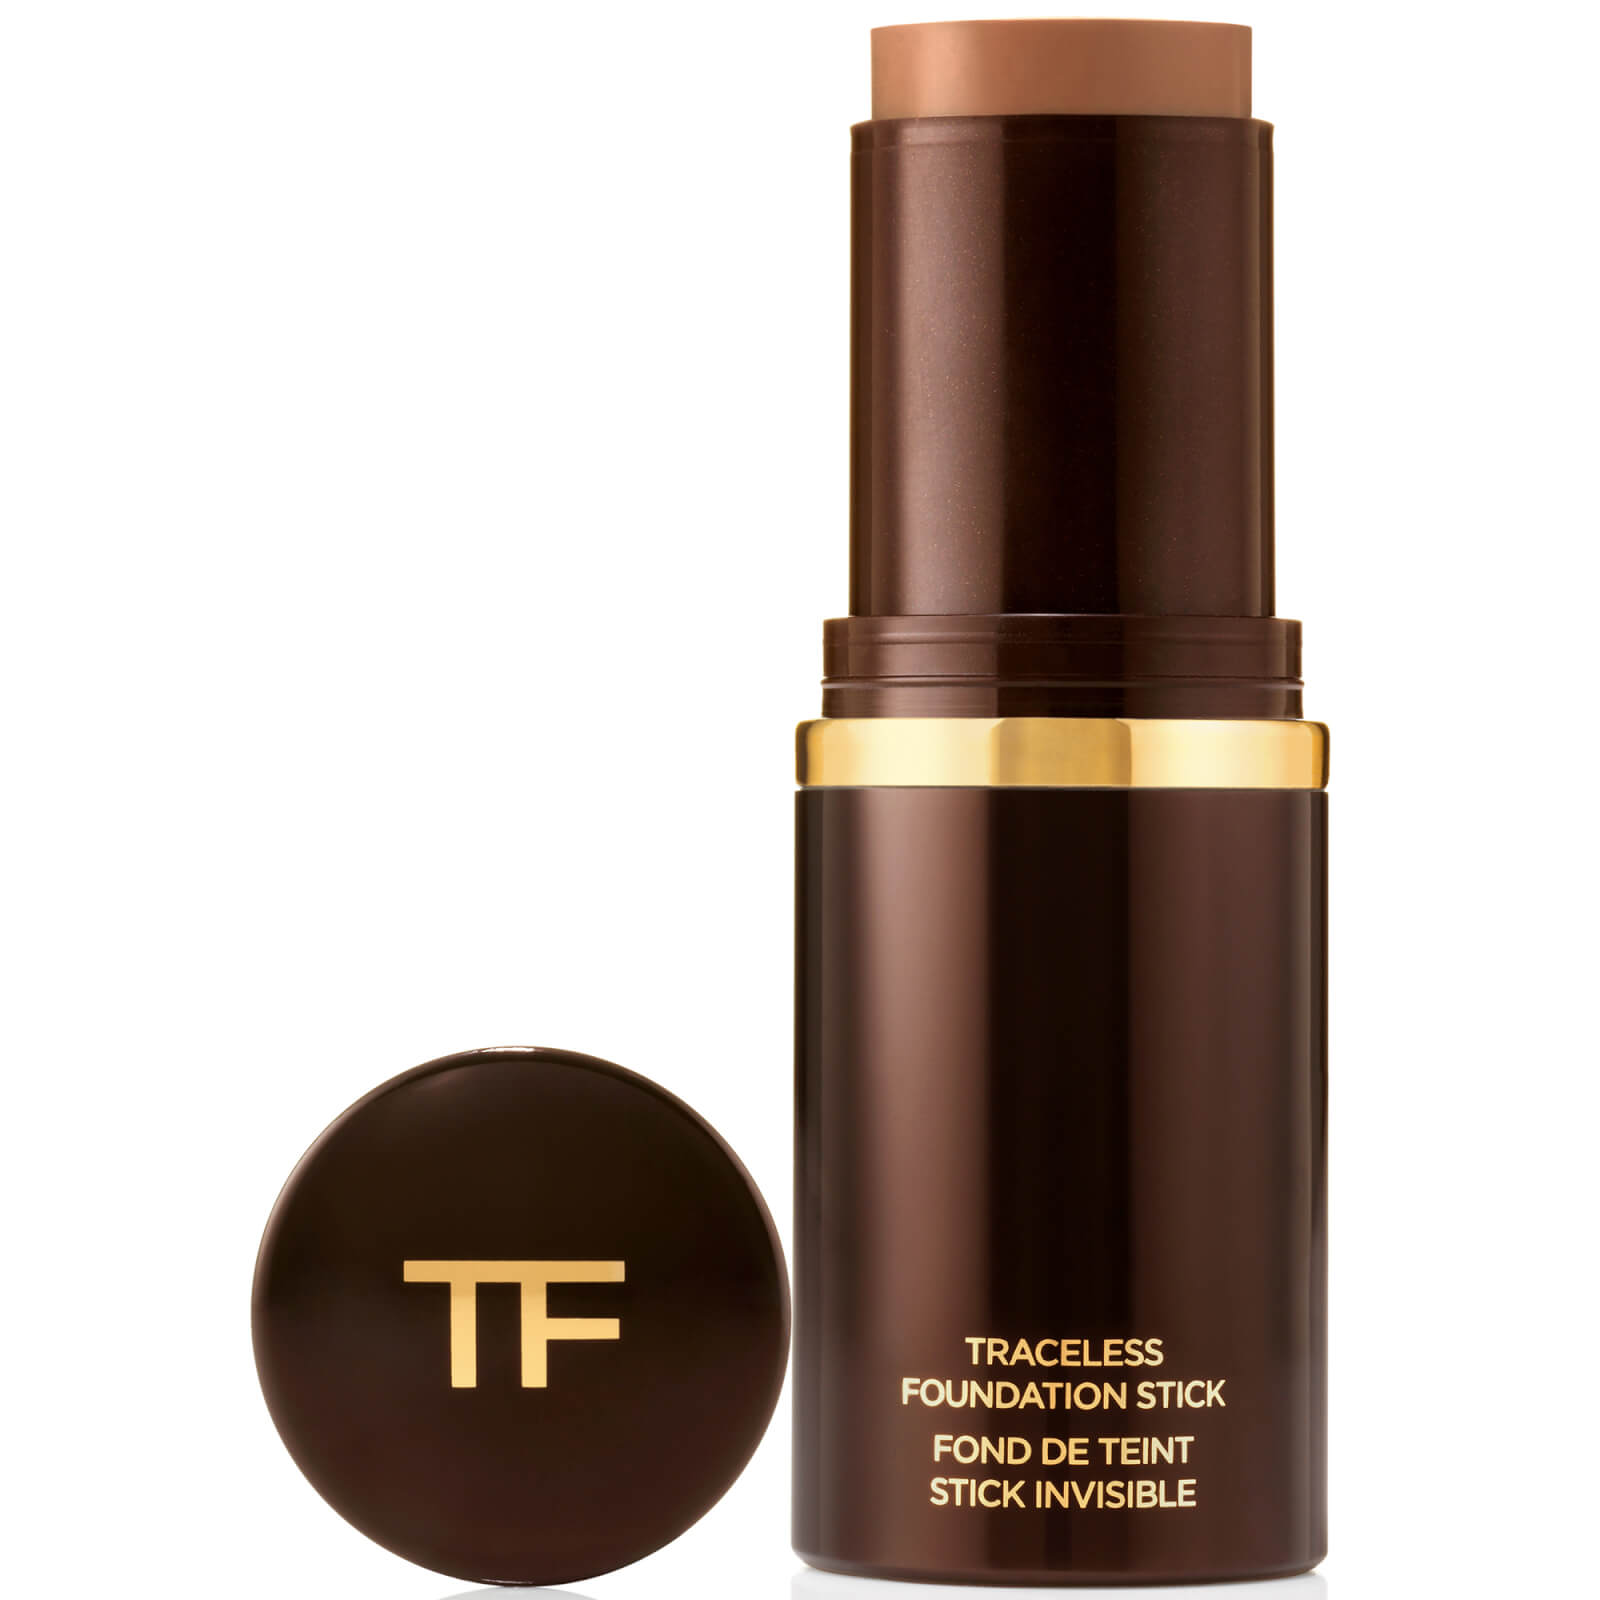 Tom Ford Traceless Foundation Stick 15g (Various Shades) - 9.5 Warm Almond